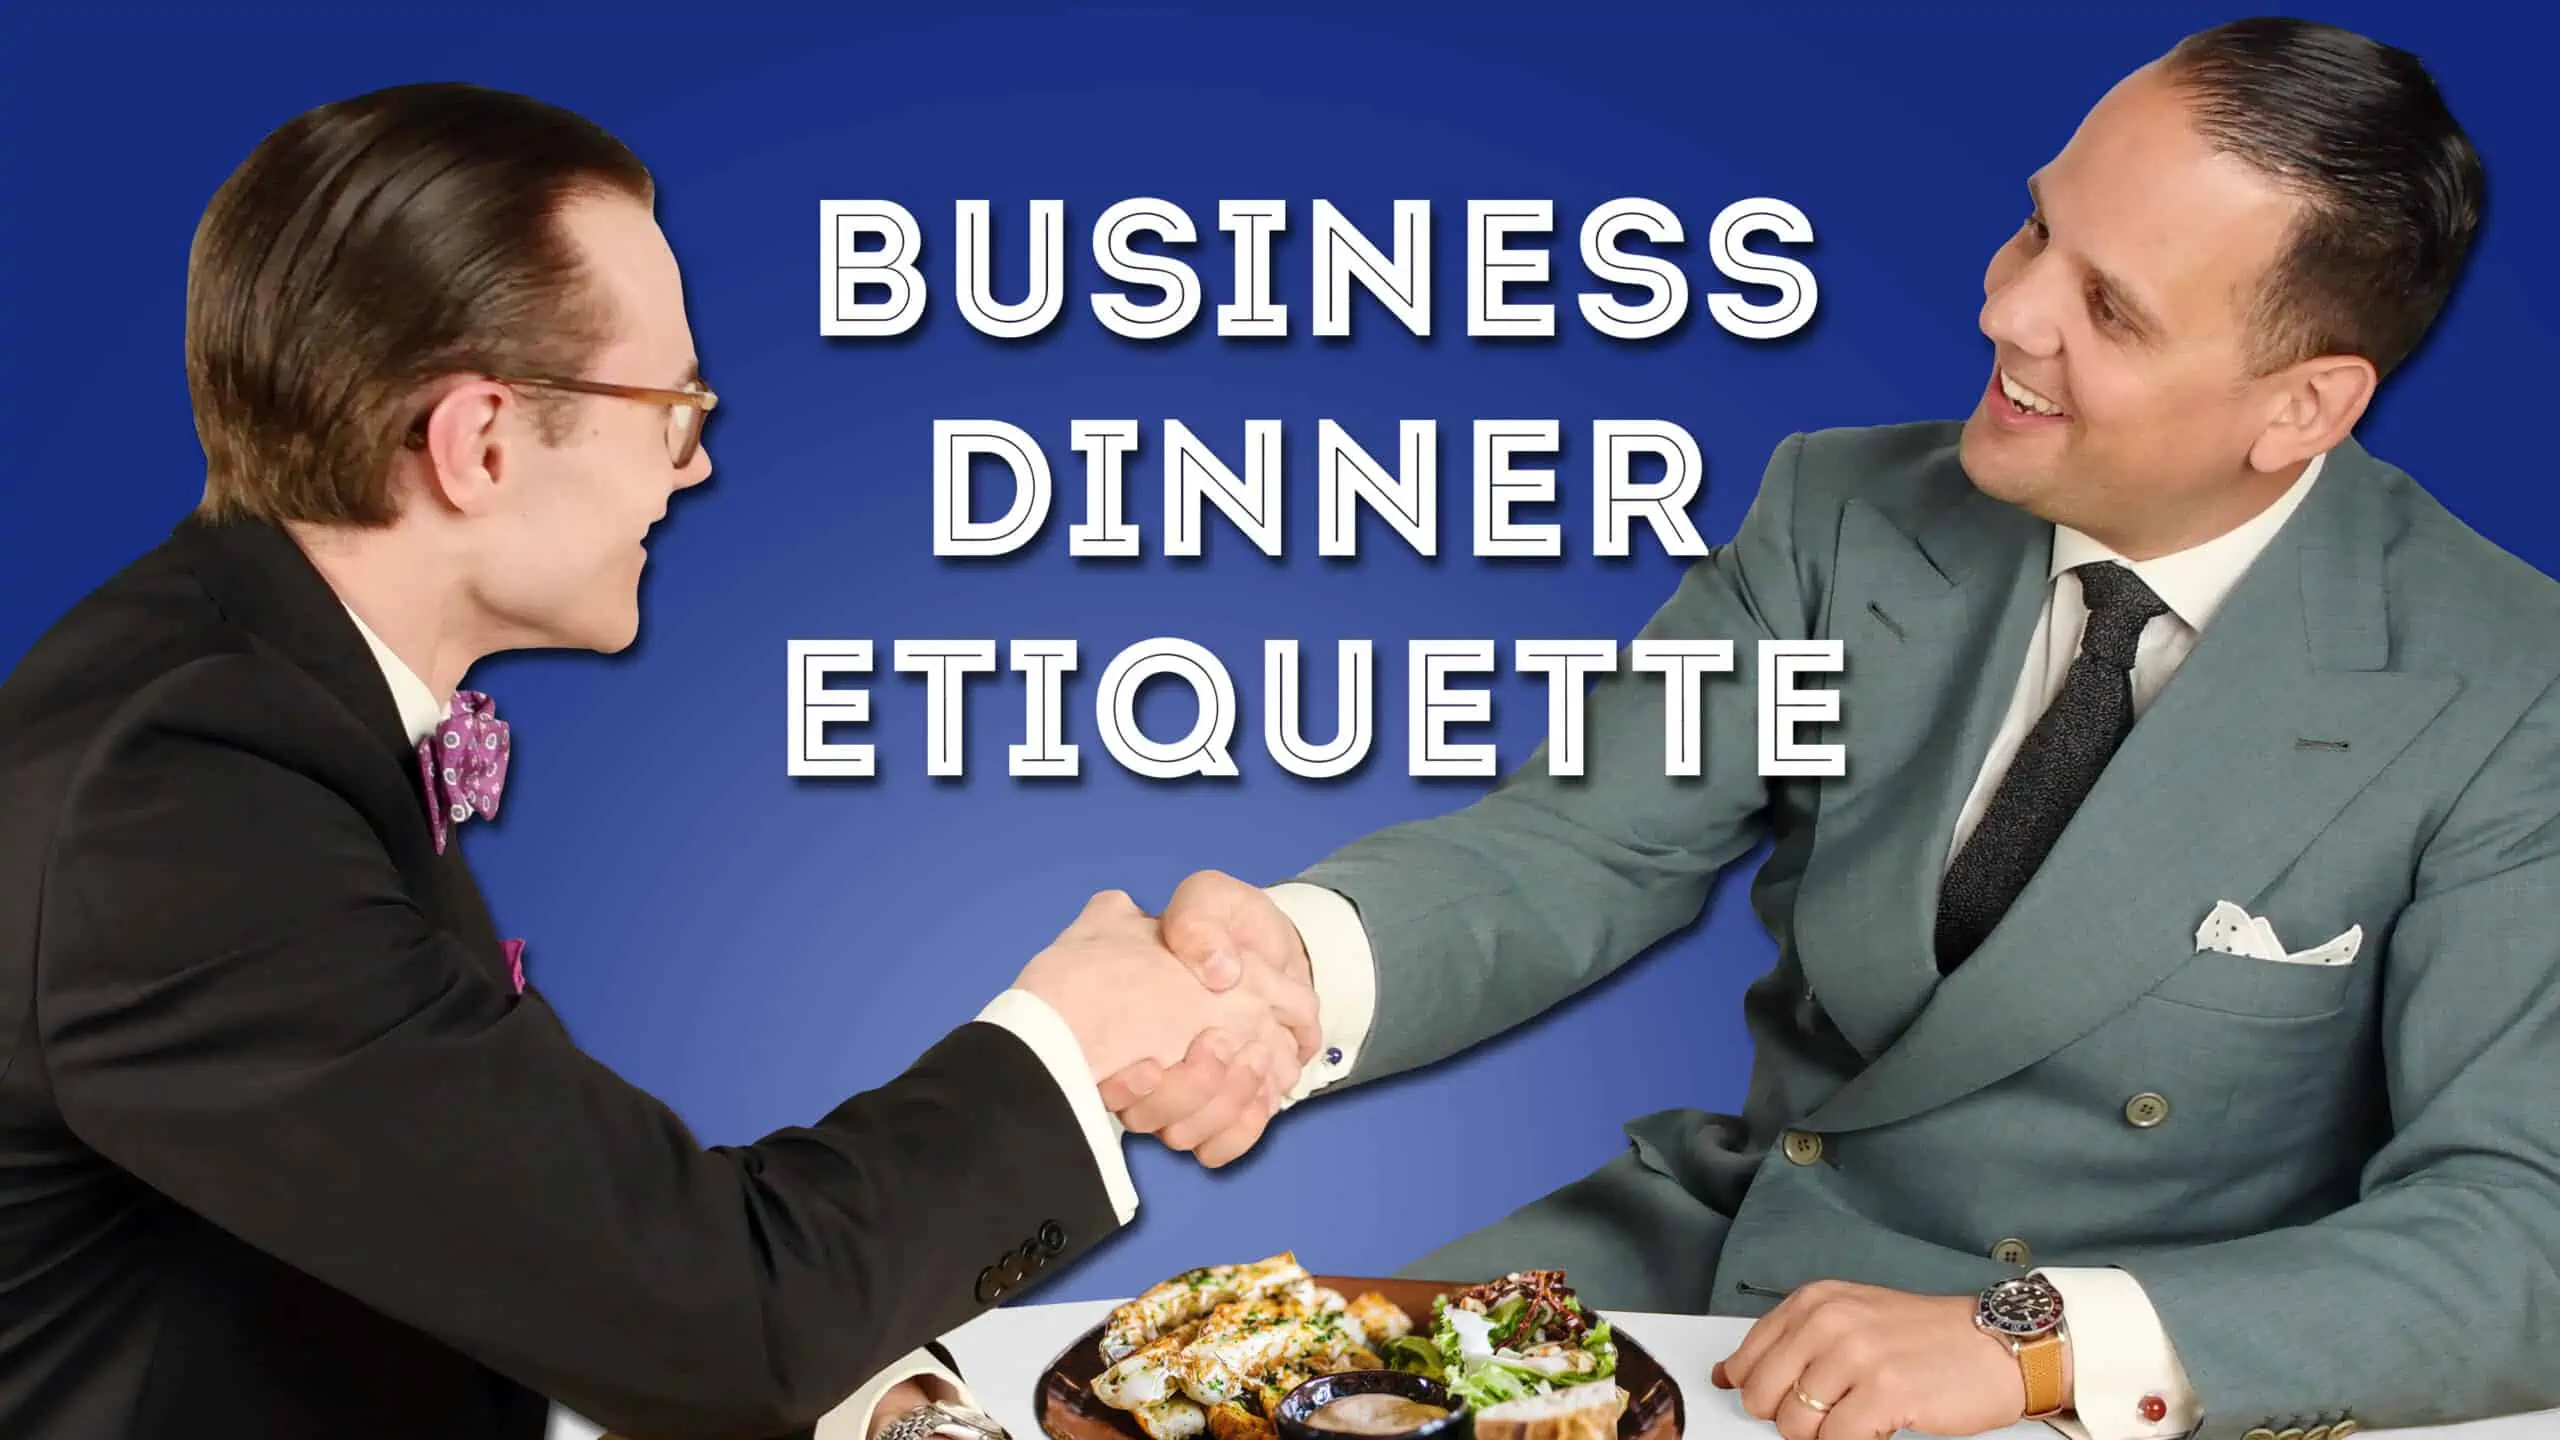 Business Dinner Etiquette Proper Manners For Dining With Clients image